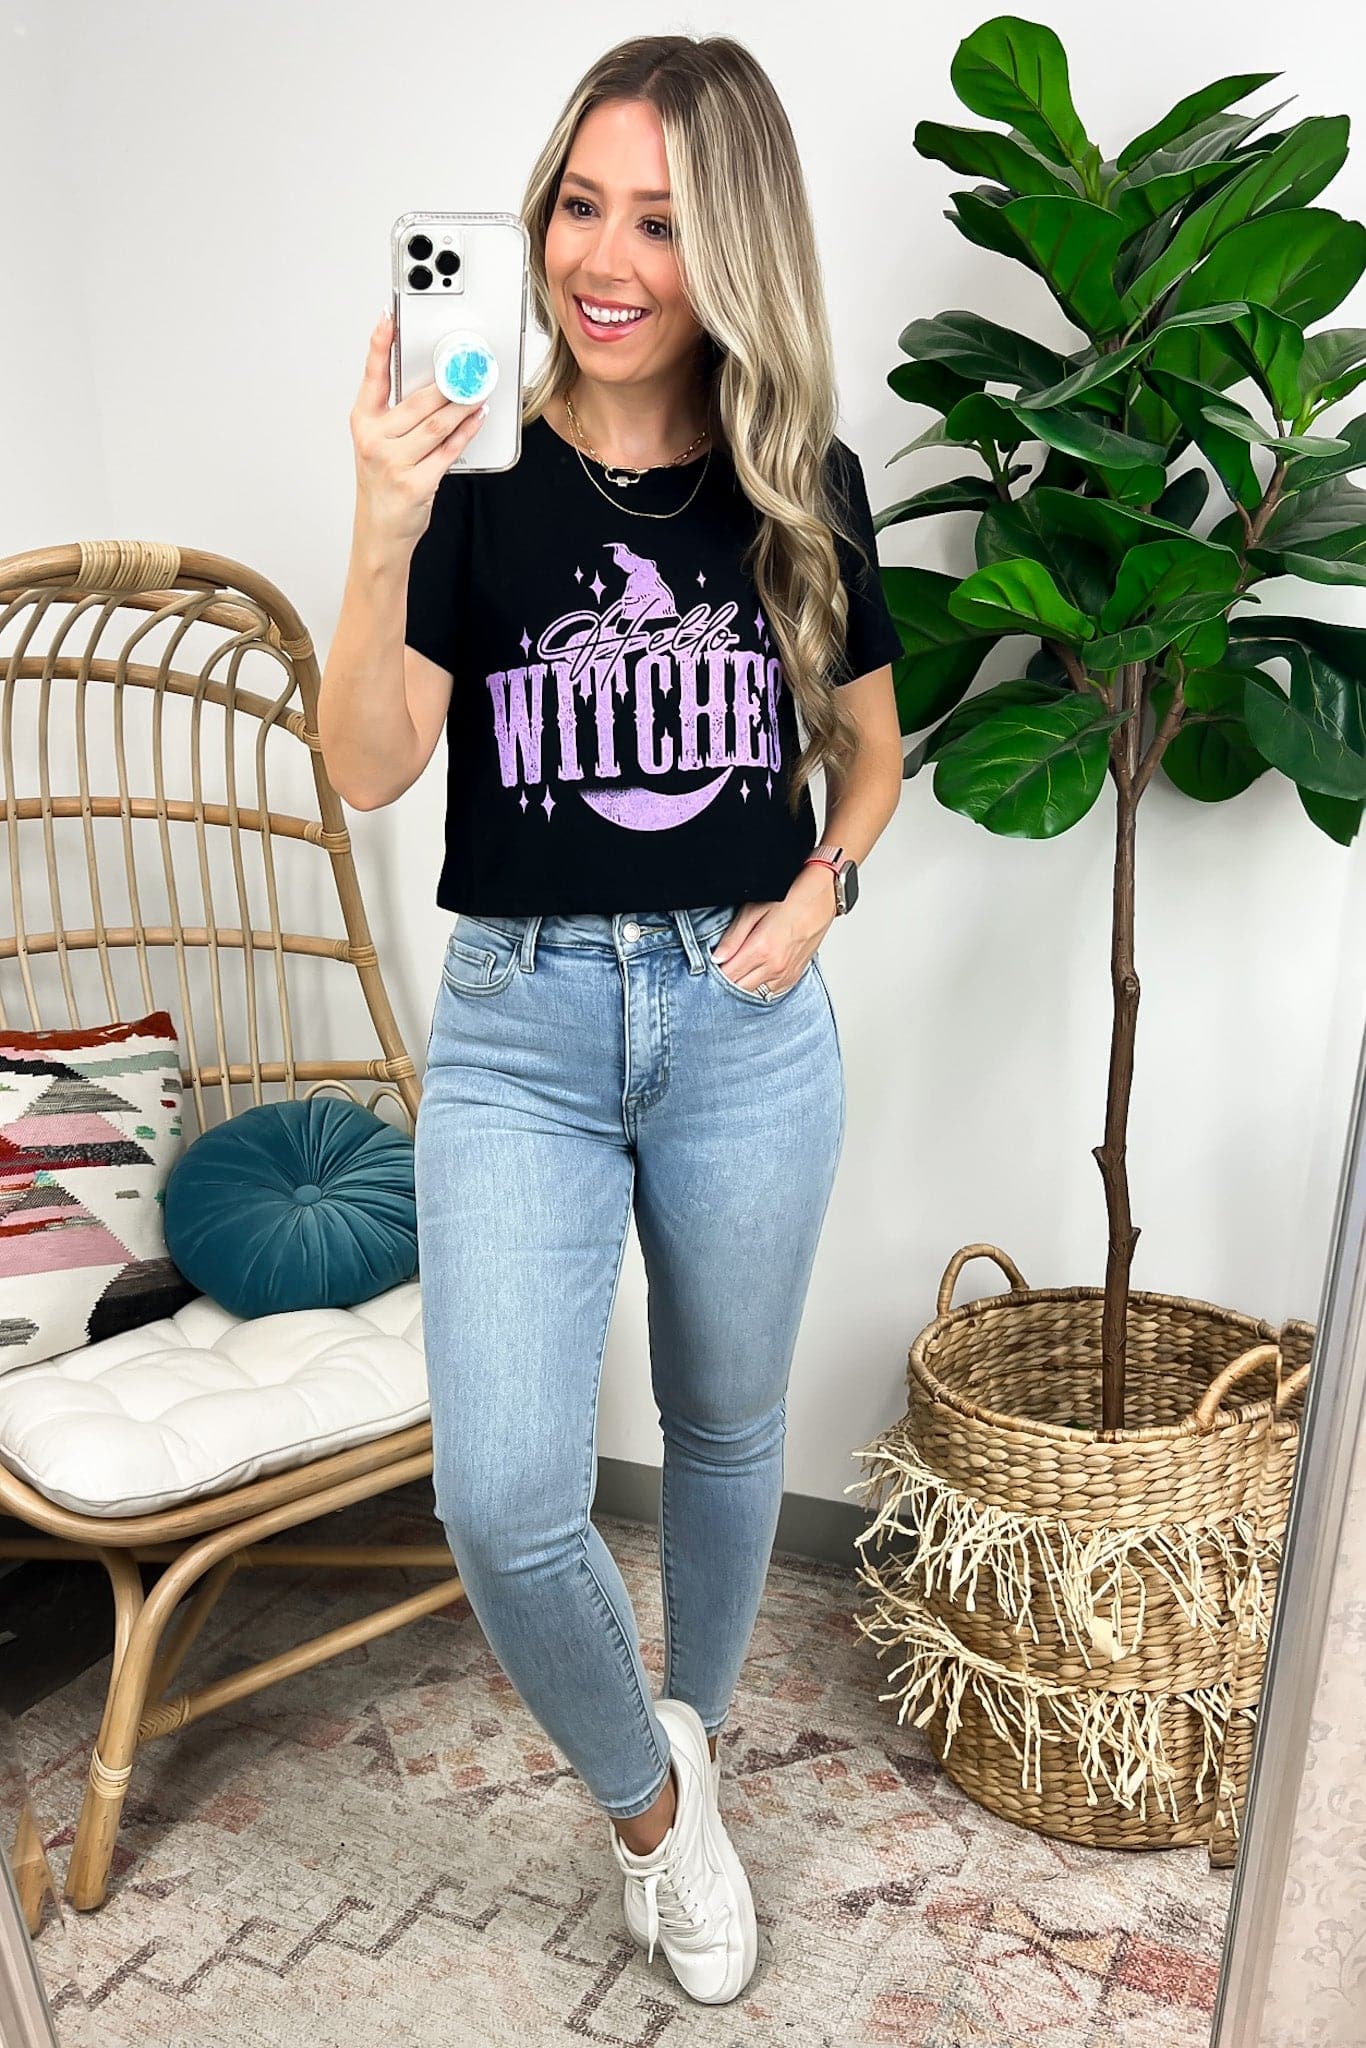  Hello Witches Graphic Cropped Tee - FINAL SALE - Madison and Mallory